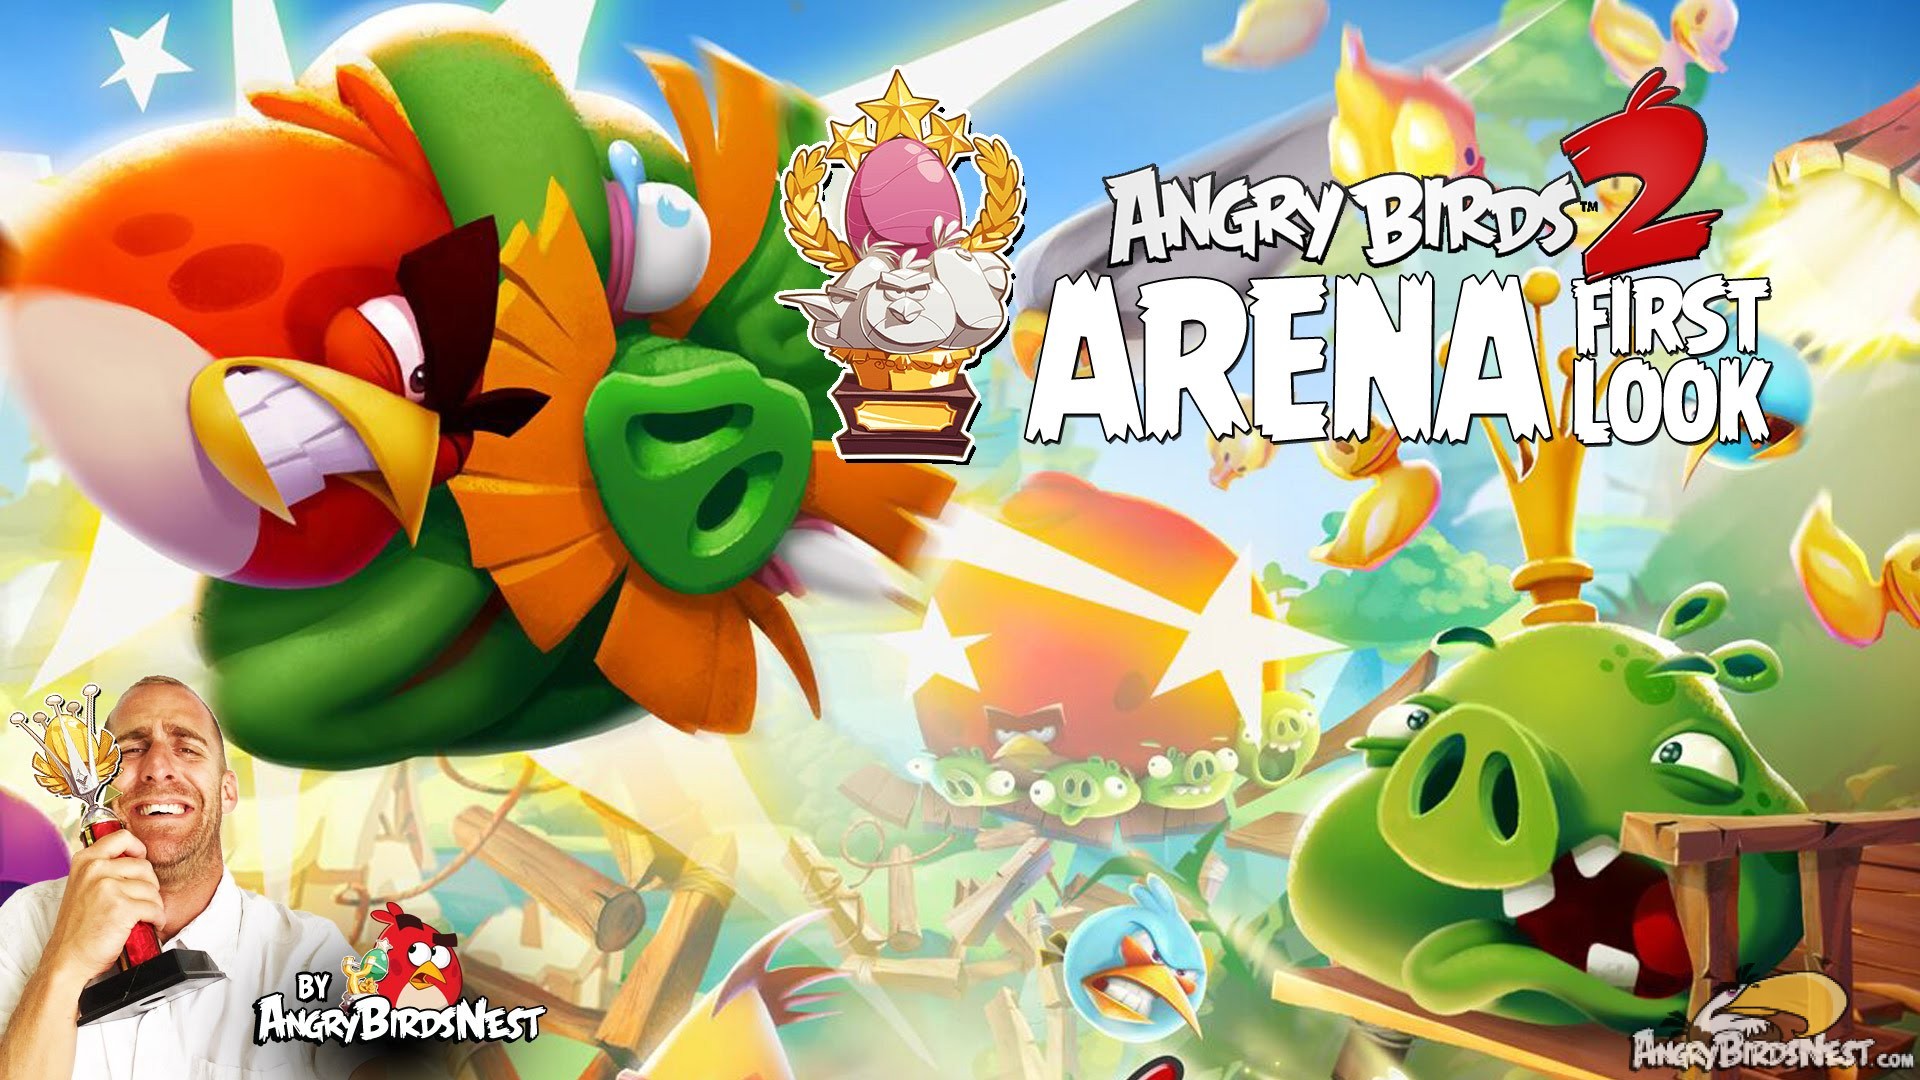 First Look at the Angry Birds 2 Arena Tournament Feature Image